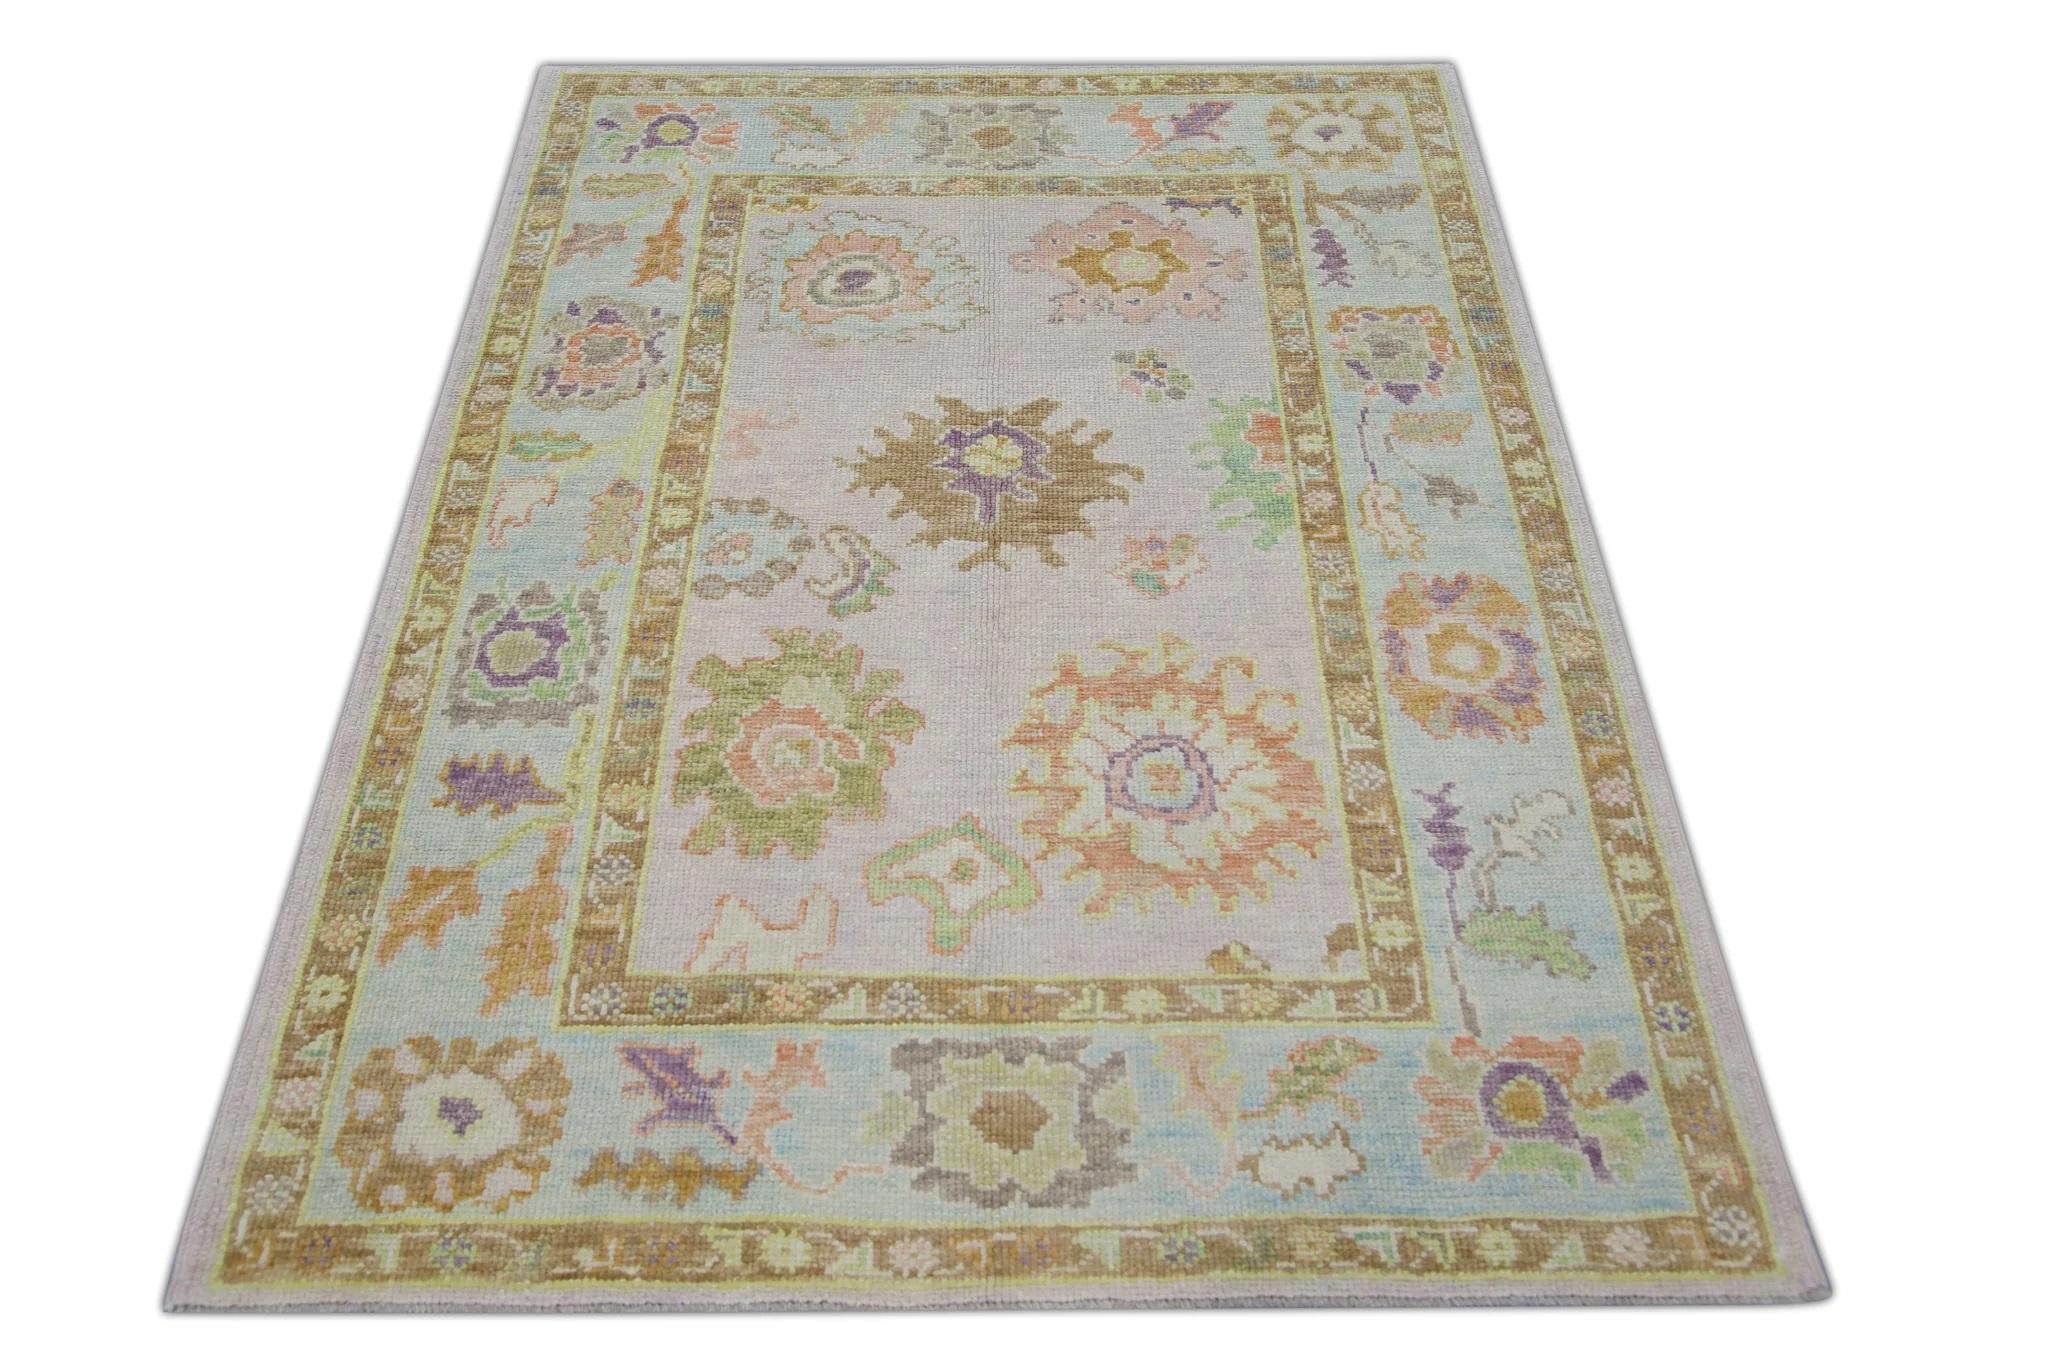 Handwoven Wool Turkish Oushak Rug Lilac Field Multicolor Floral Design 4'2 x 5'7 For Sale 3